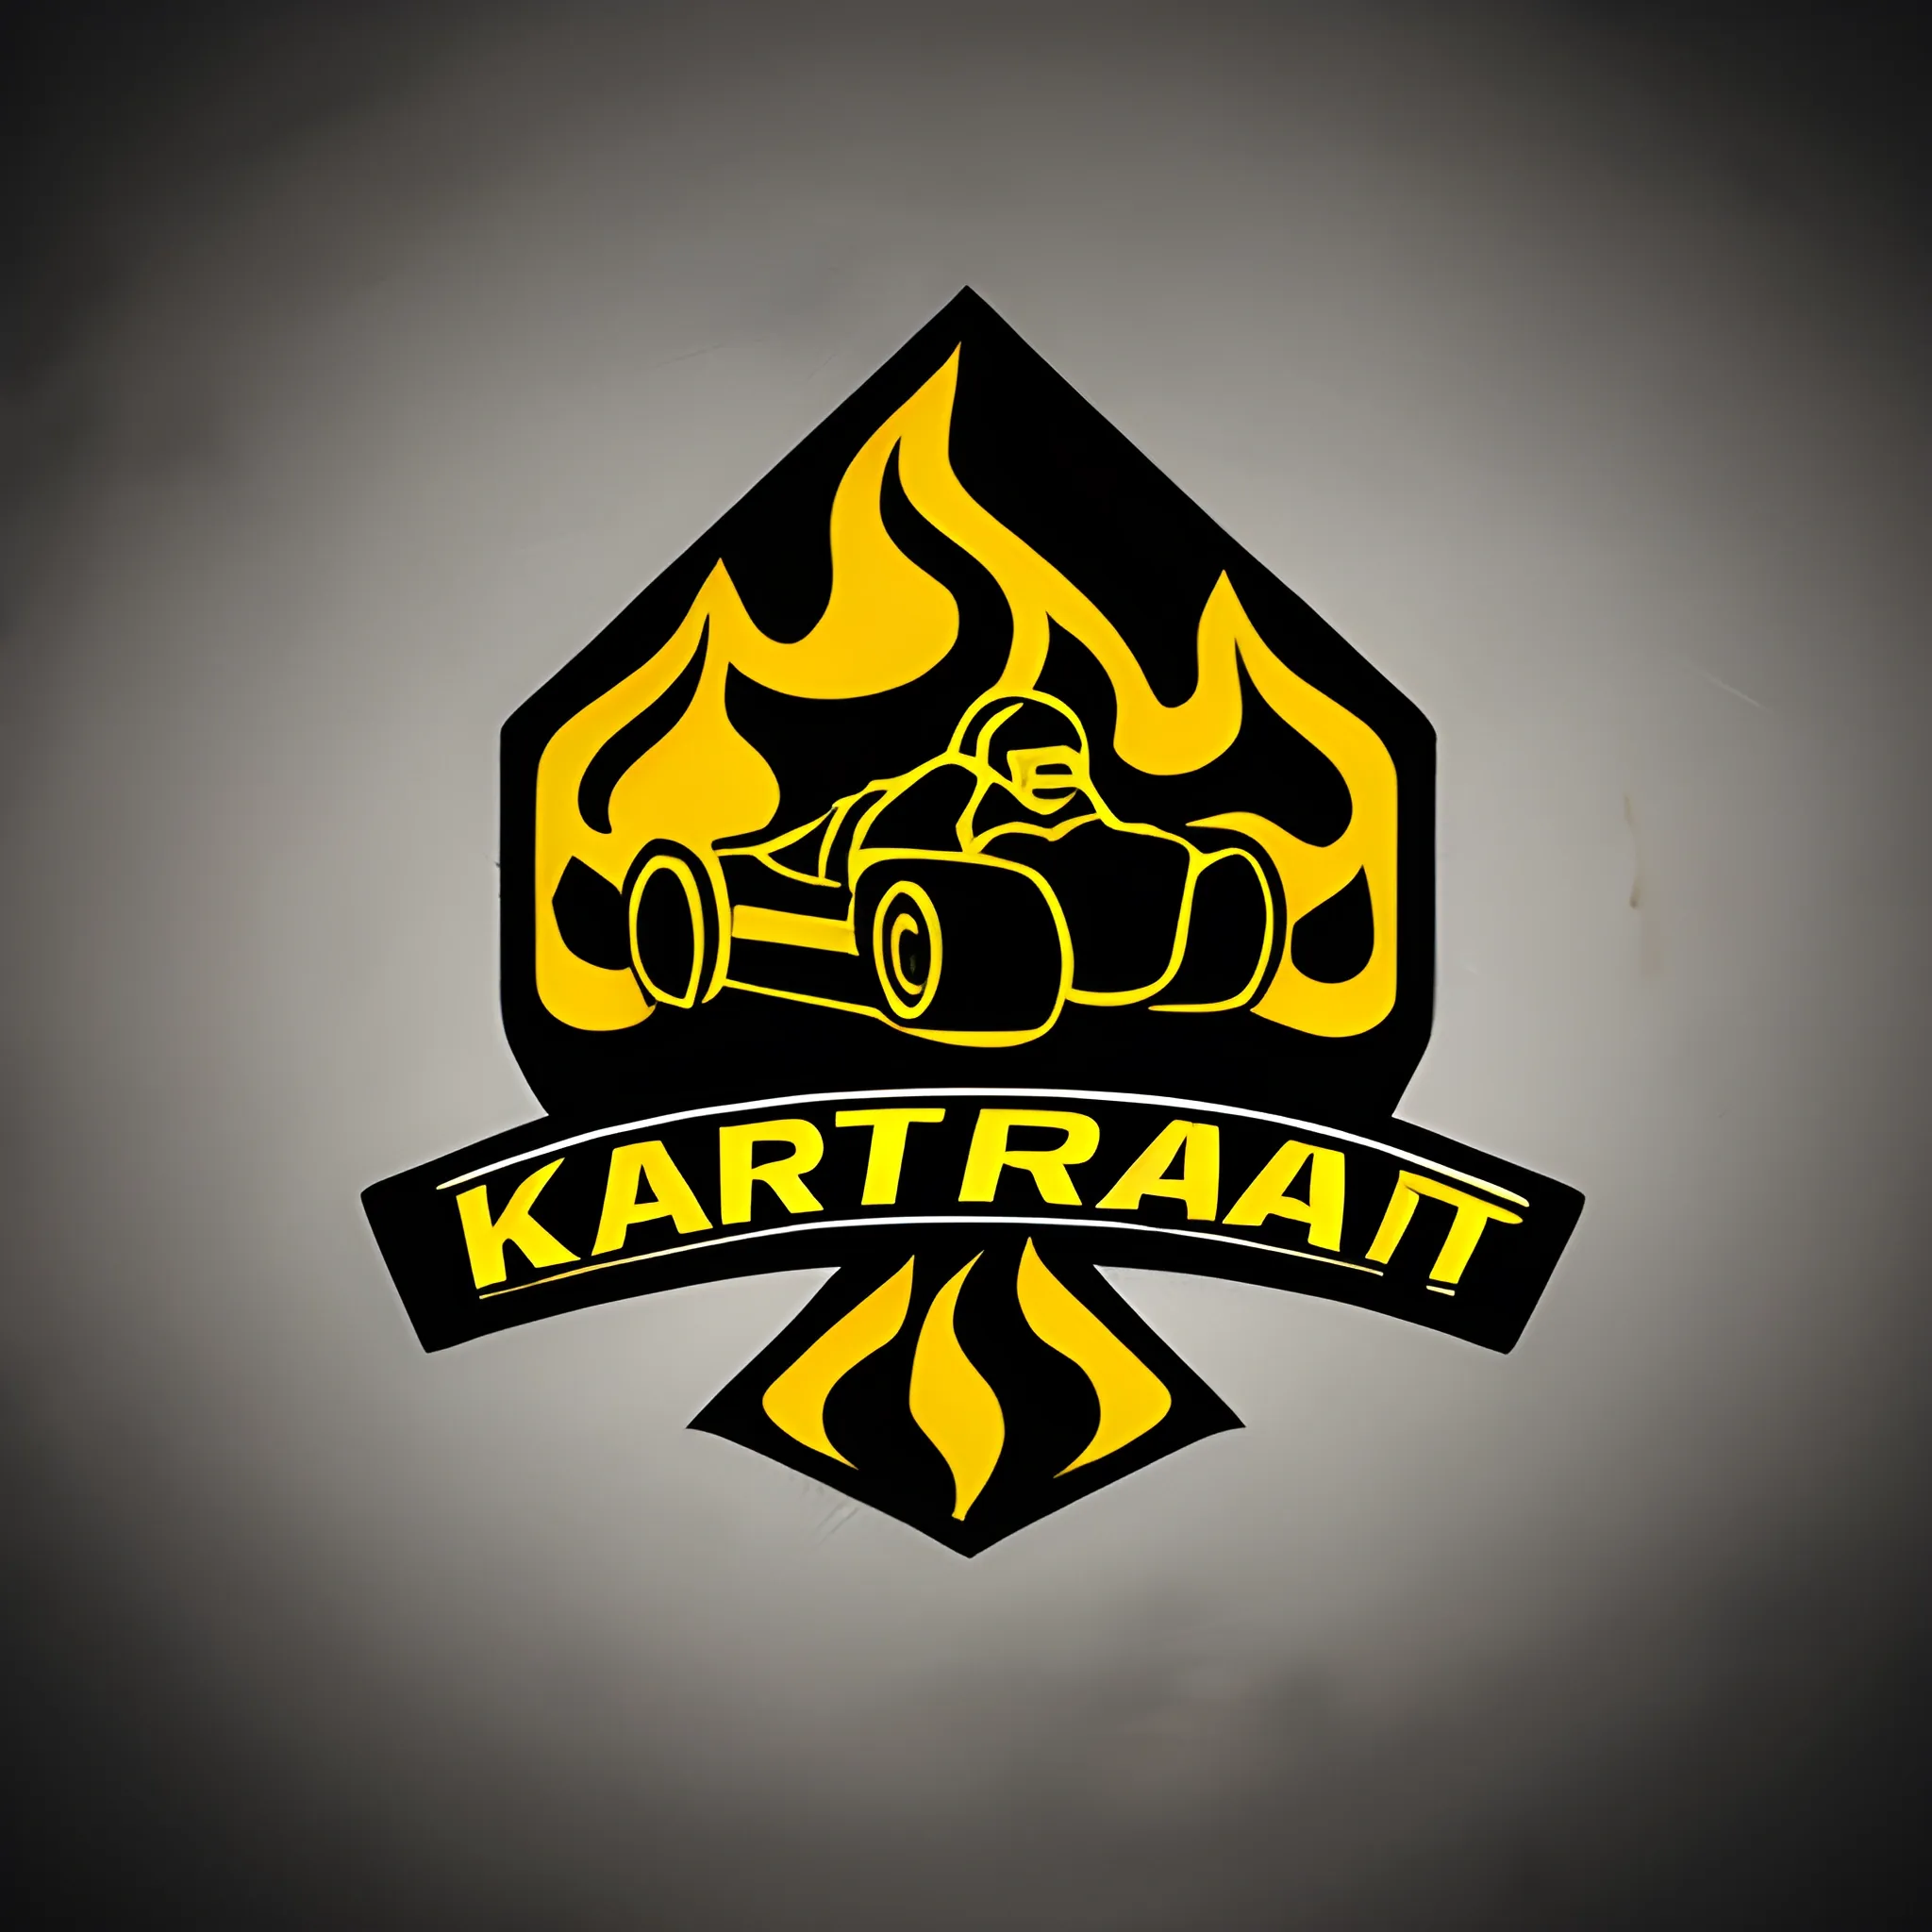 create a logo for a karting team, with a kart leaving a trail of fire on the runway and also print the name "Karting Last Lap"on the logo